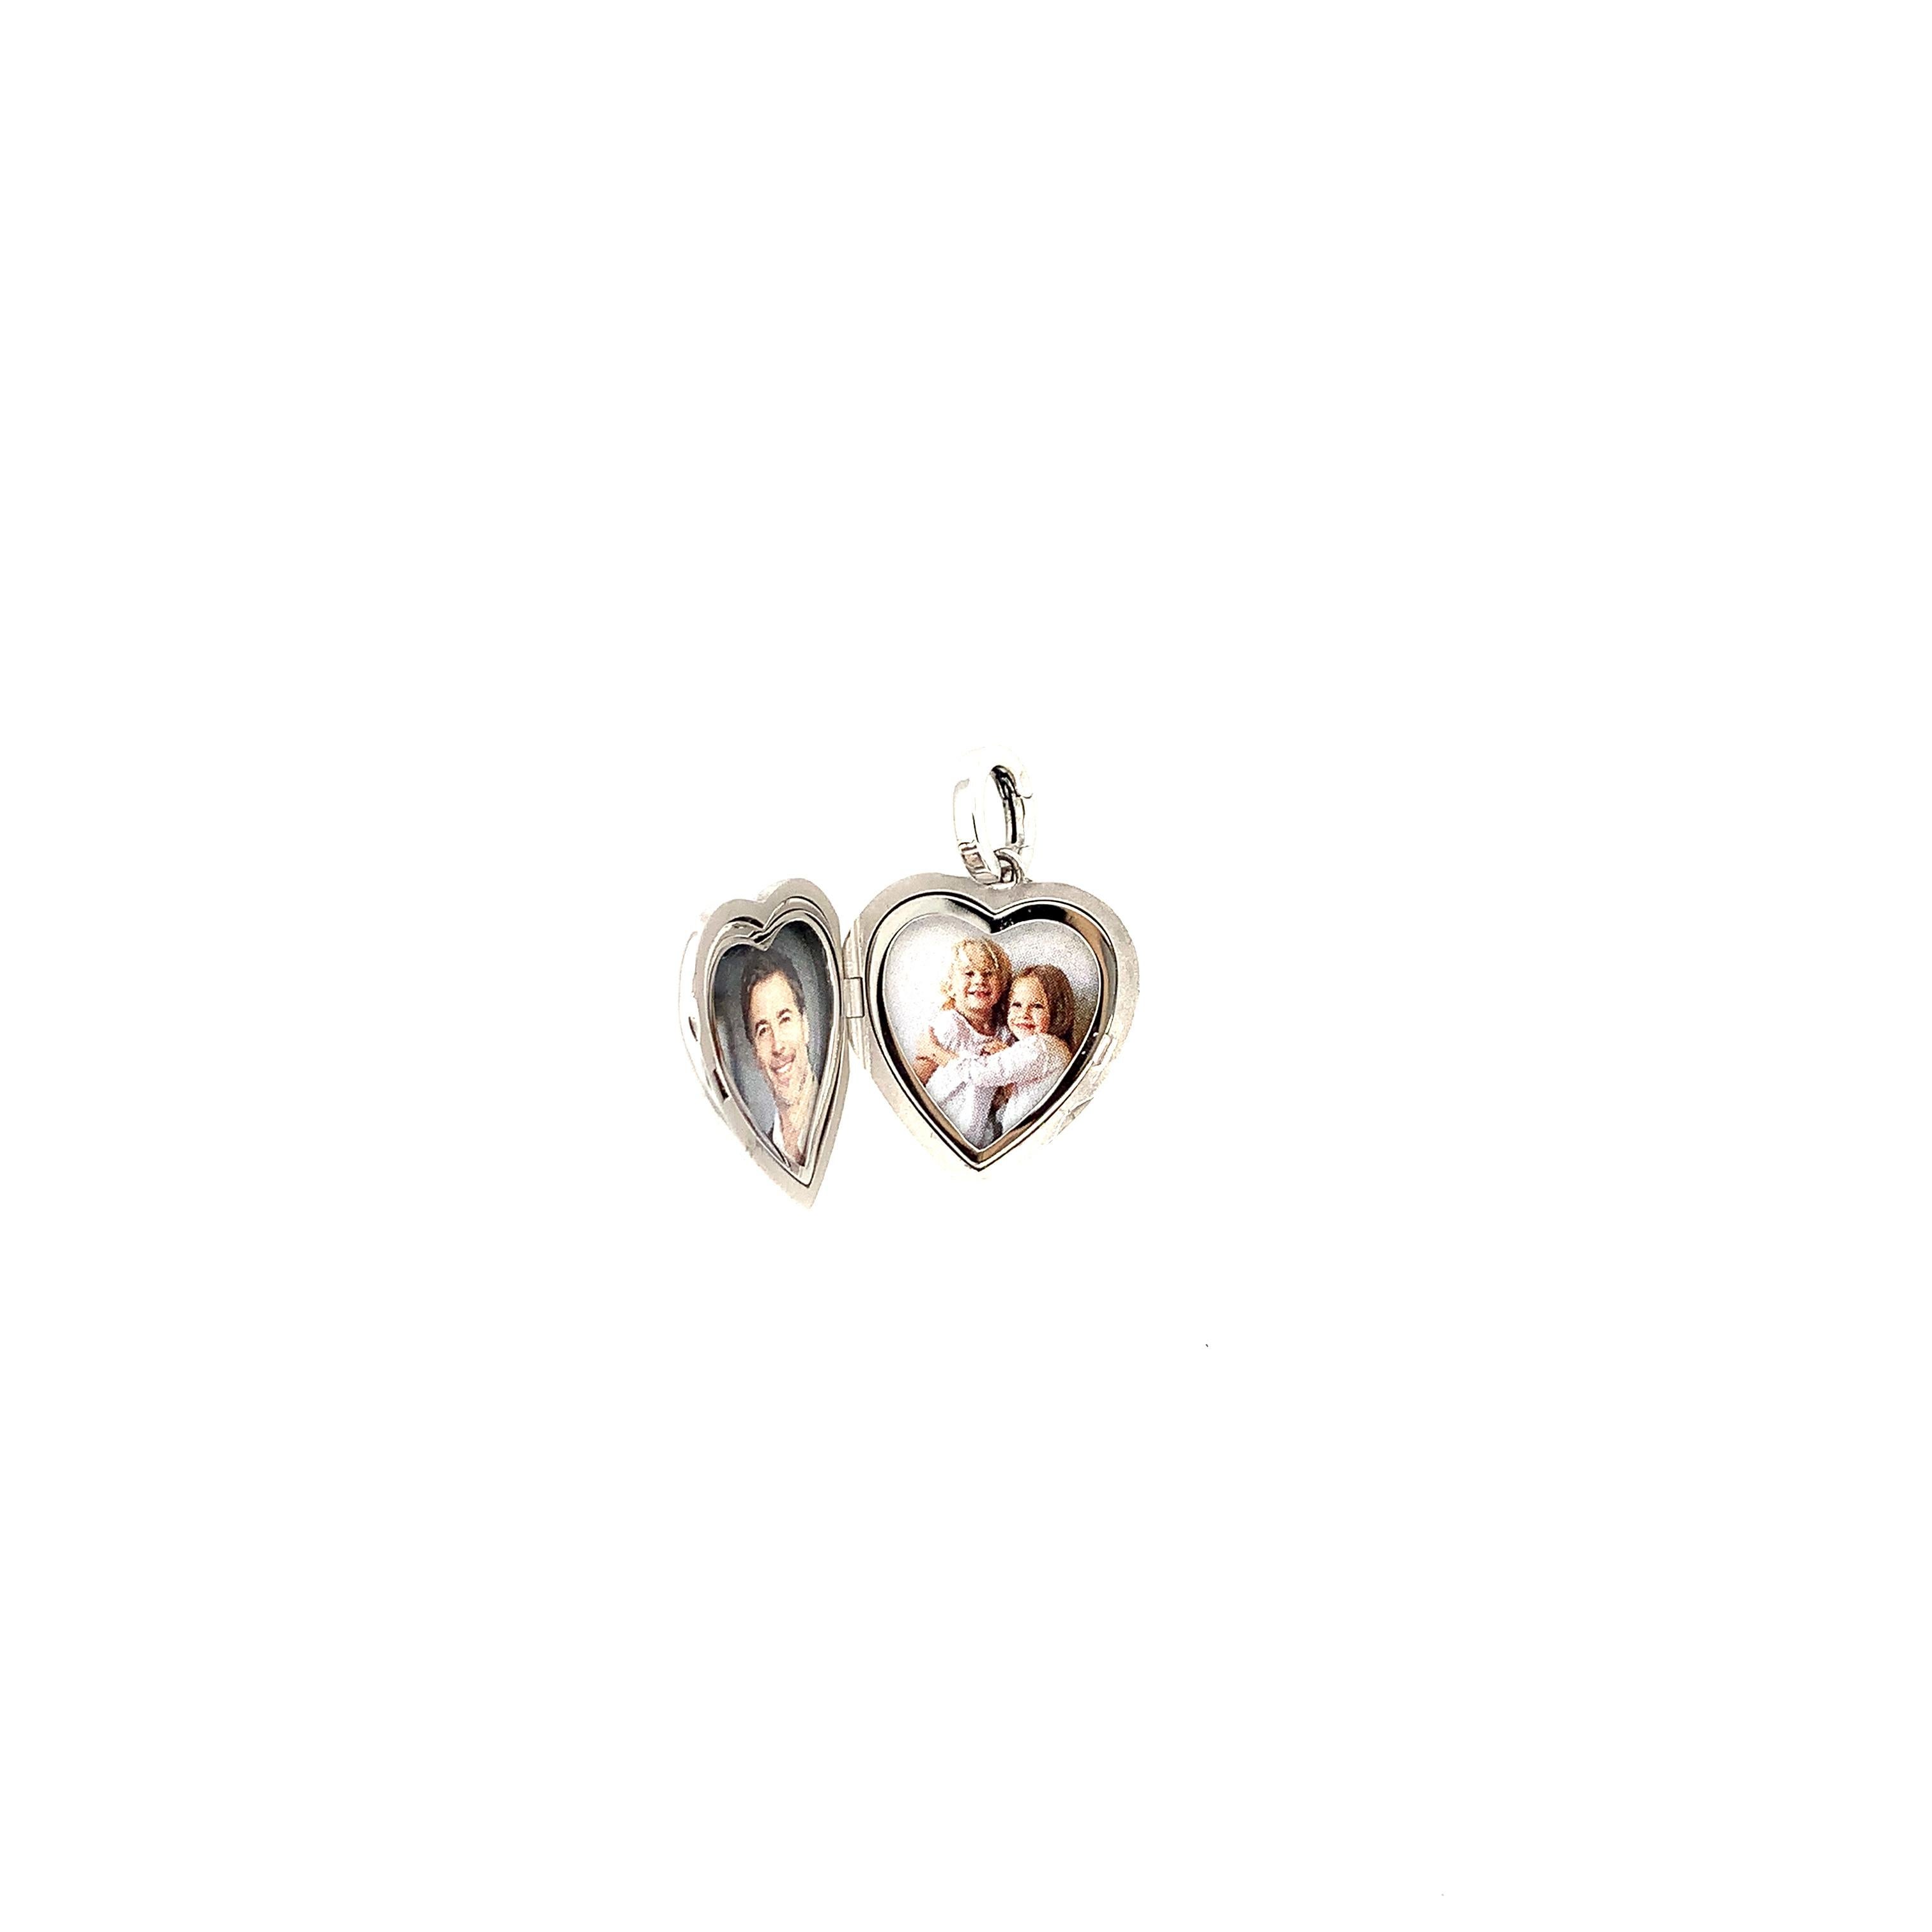 Heart Shaped Locket Pendant Necklace - 18k Polished White Gold - 23.0 x 25.0 mm For Sale 1